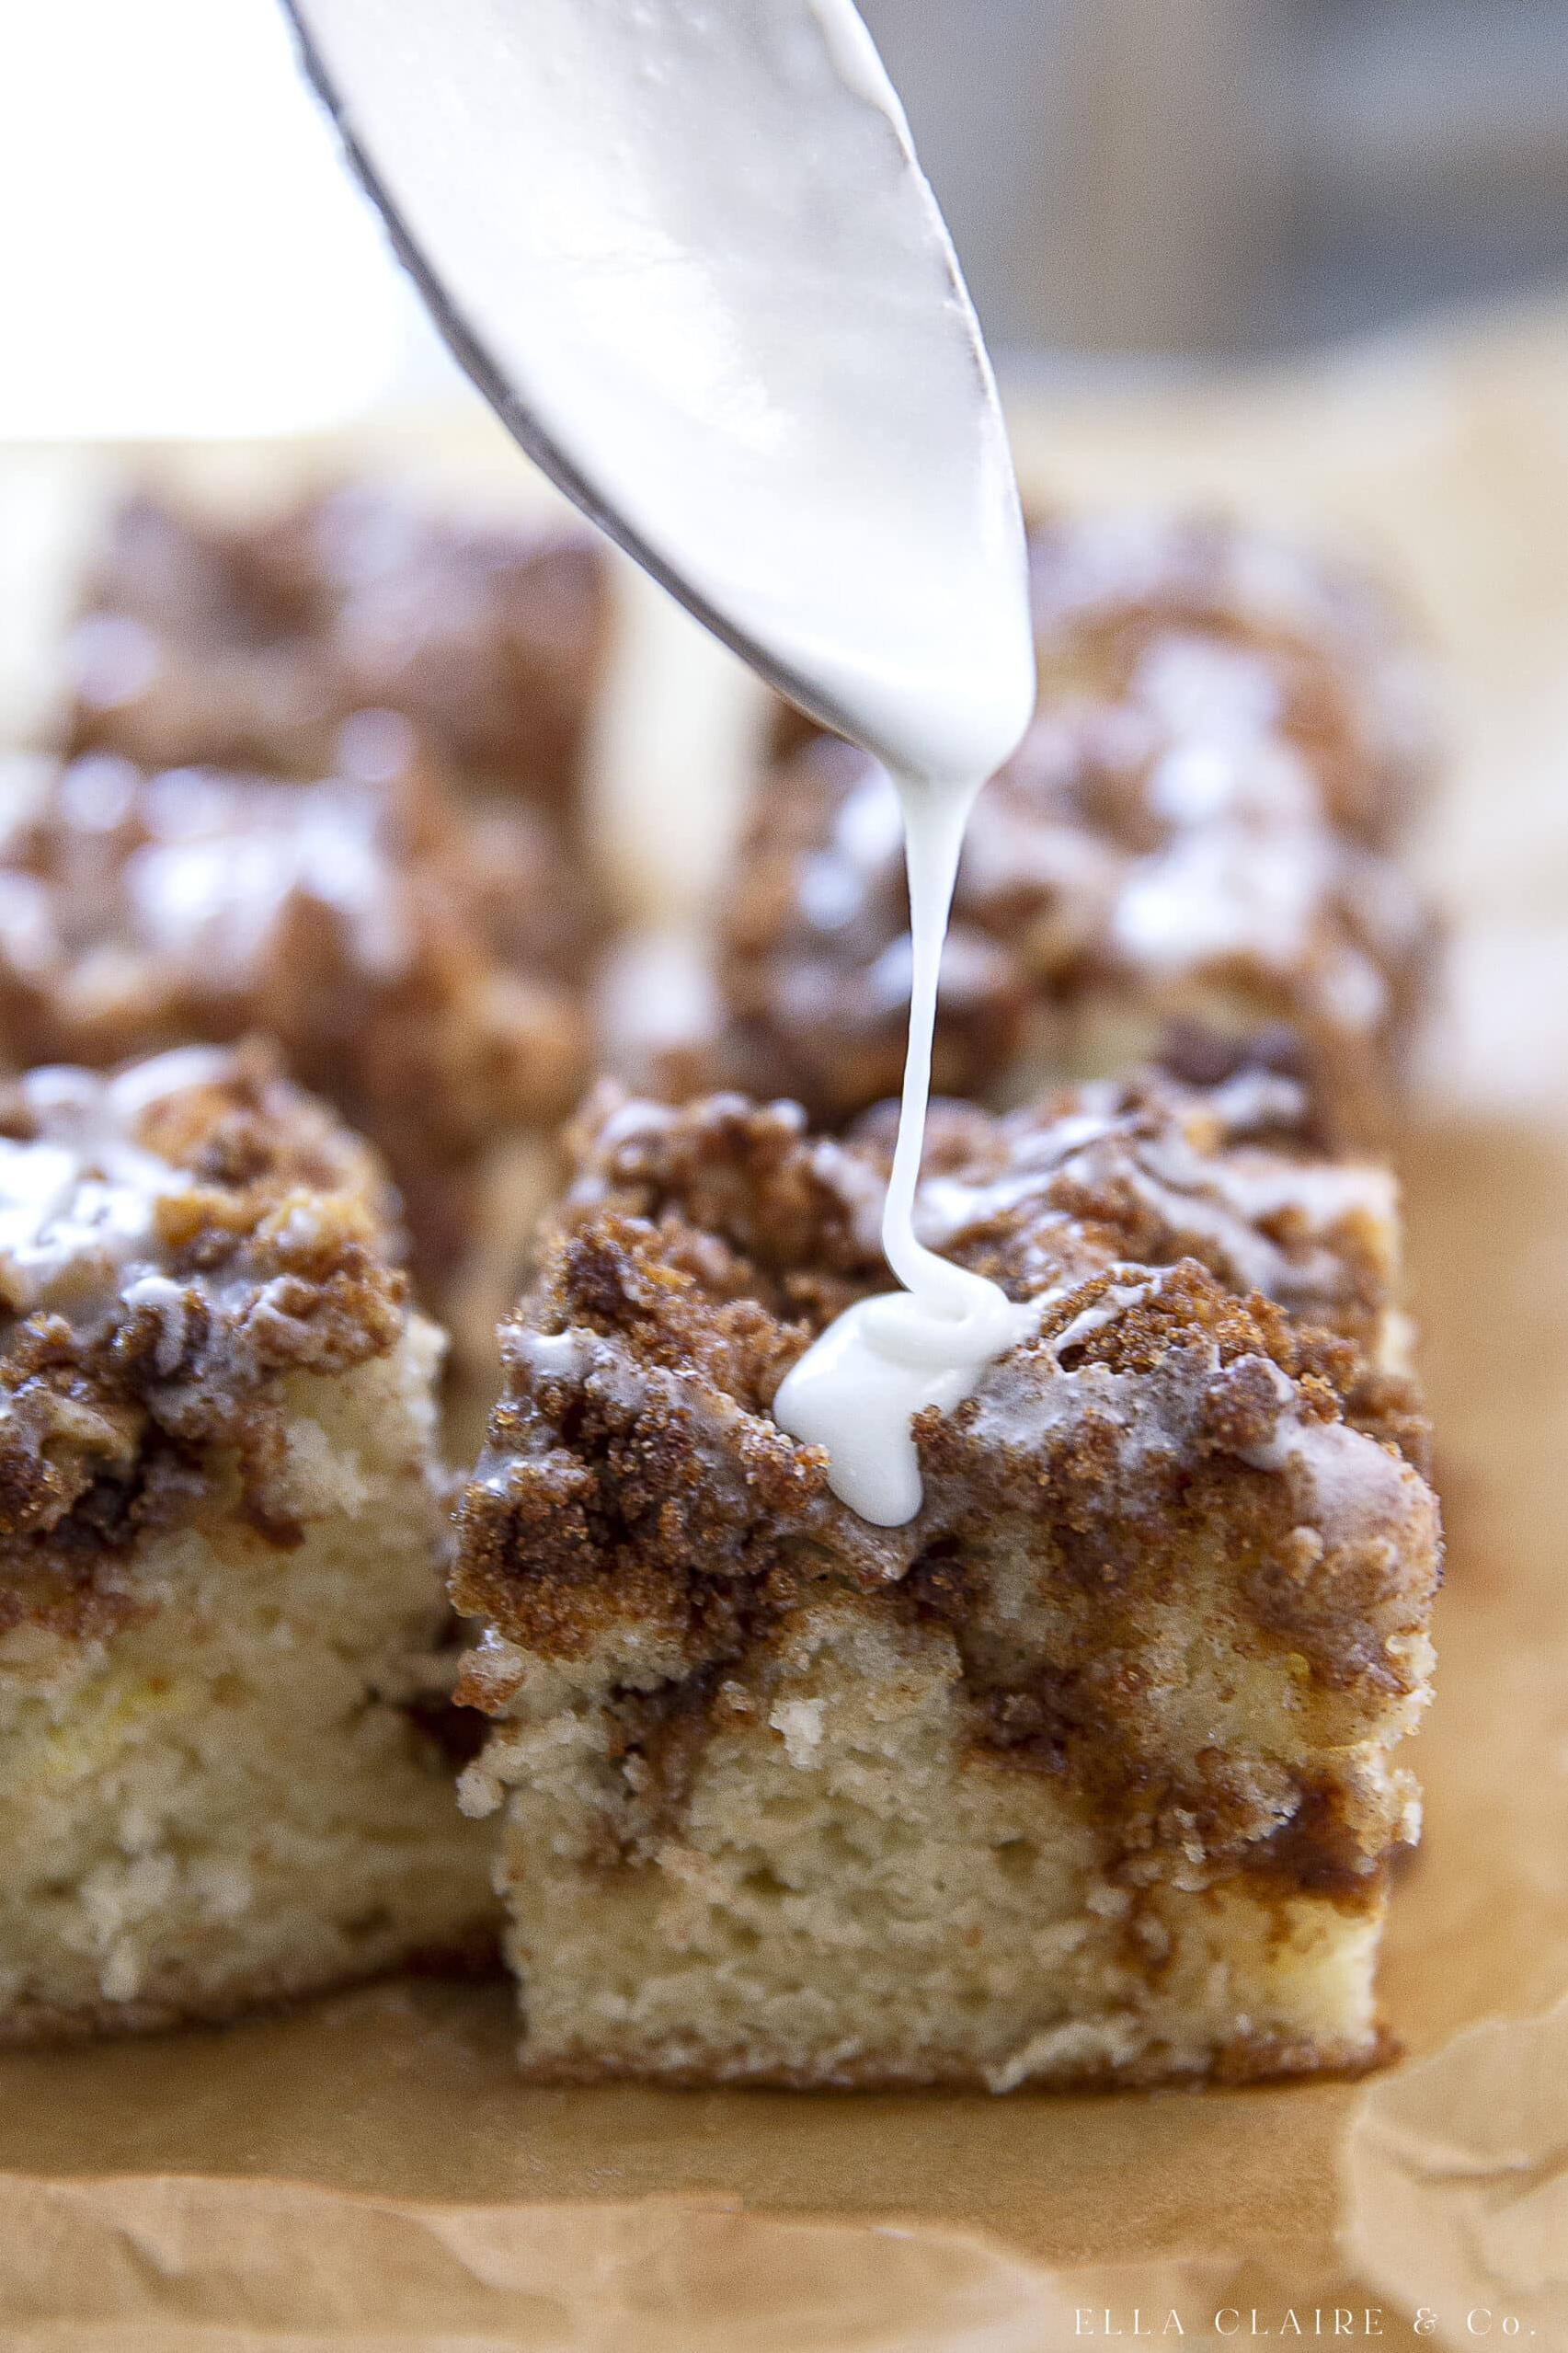  Indulge in the perfect slice of moist and fluffy coffee cake.